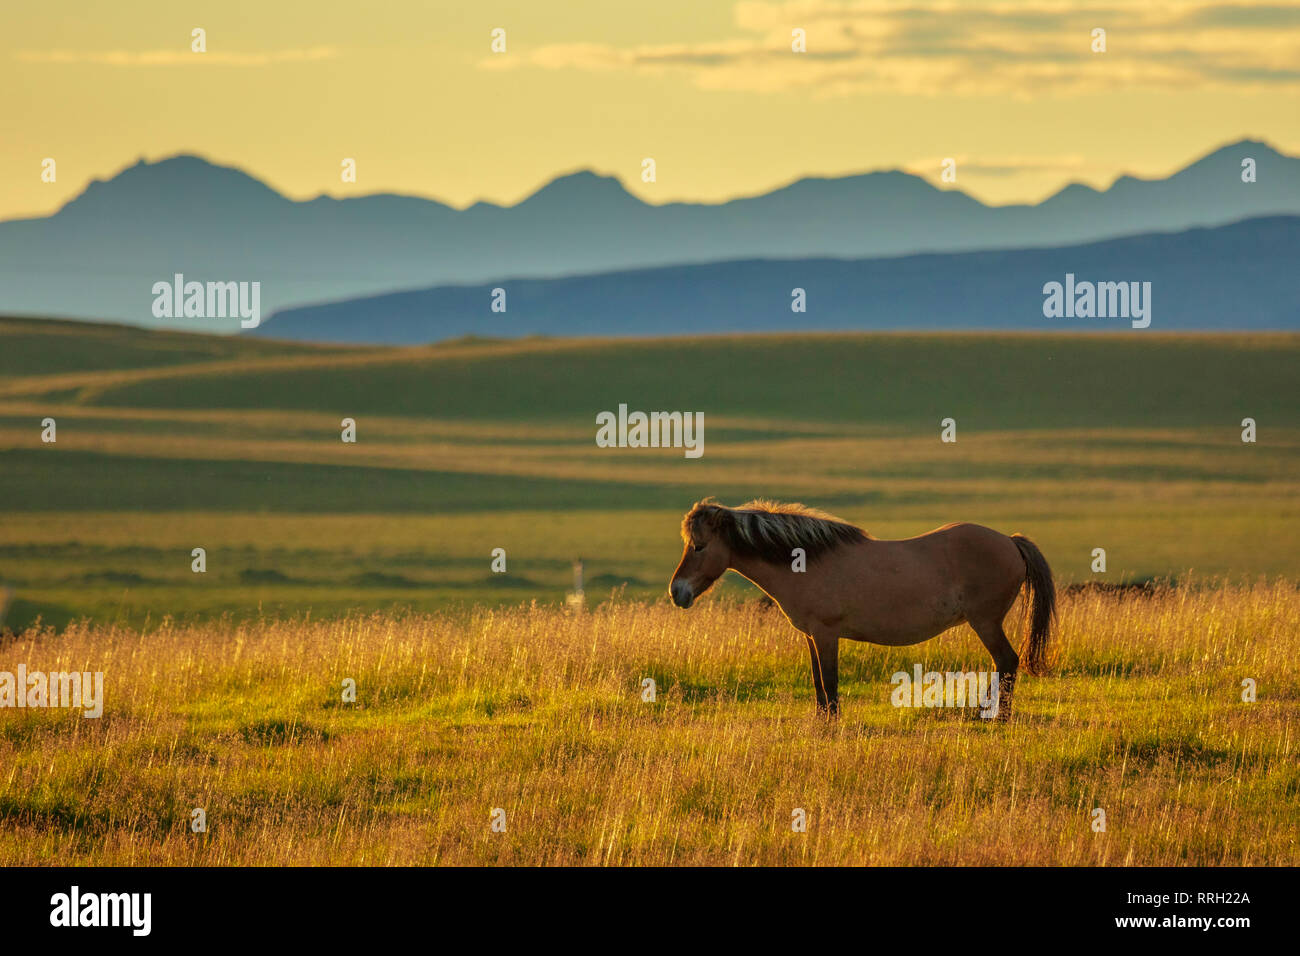 Icelandic horse in a field near Hella, Sudhurland, Iceland. Stock Photo